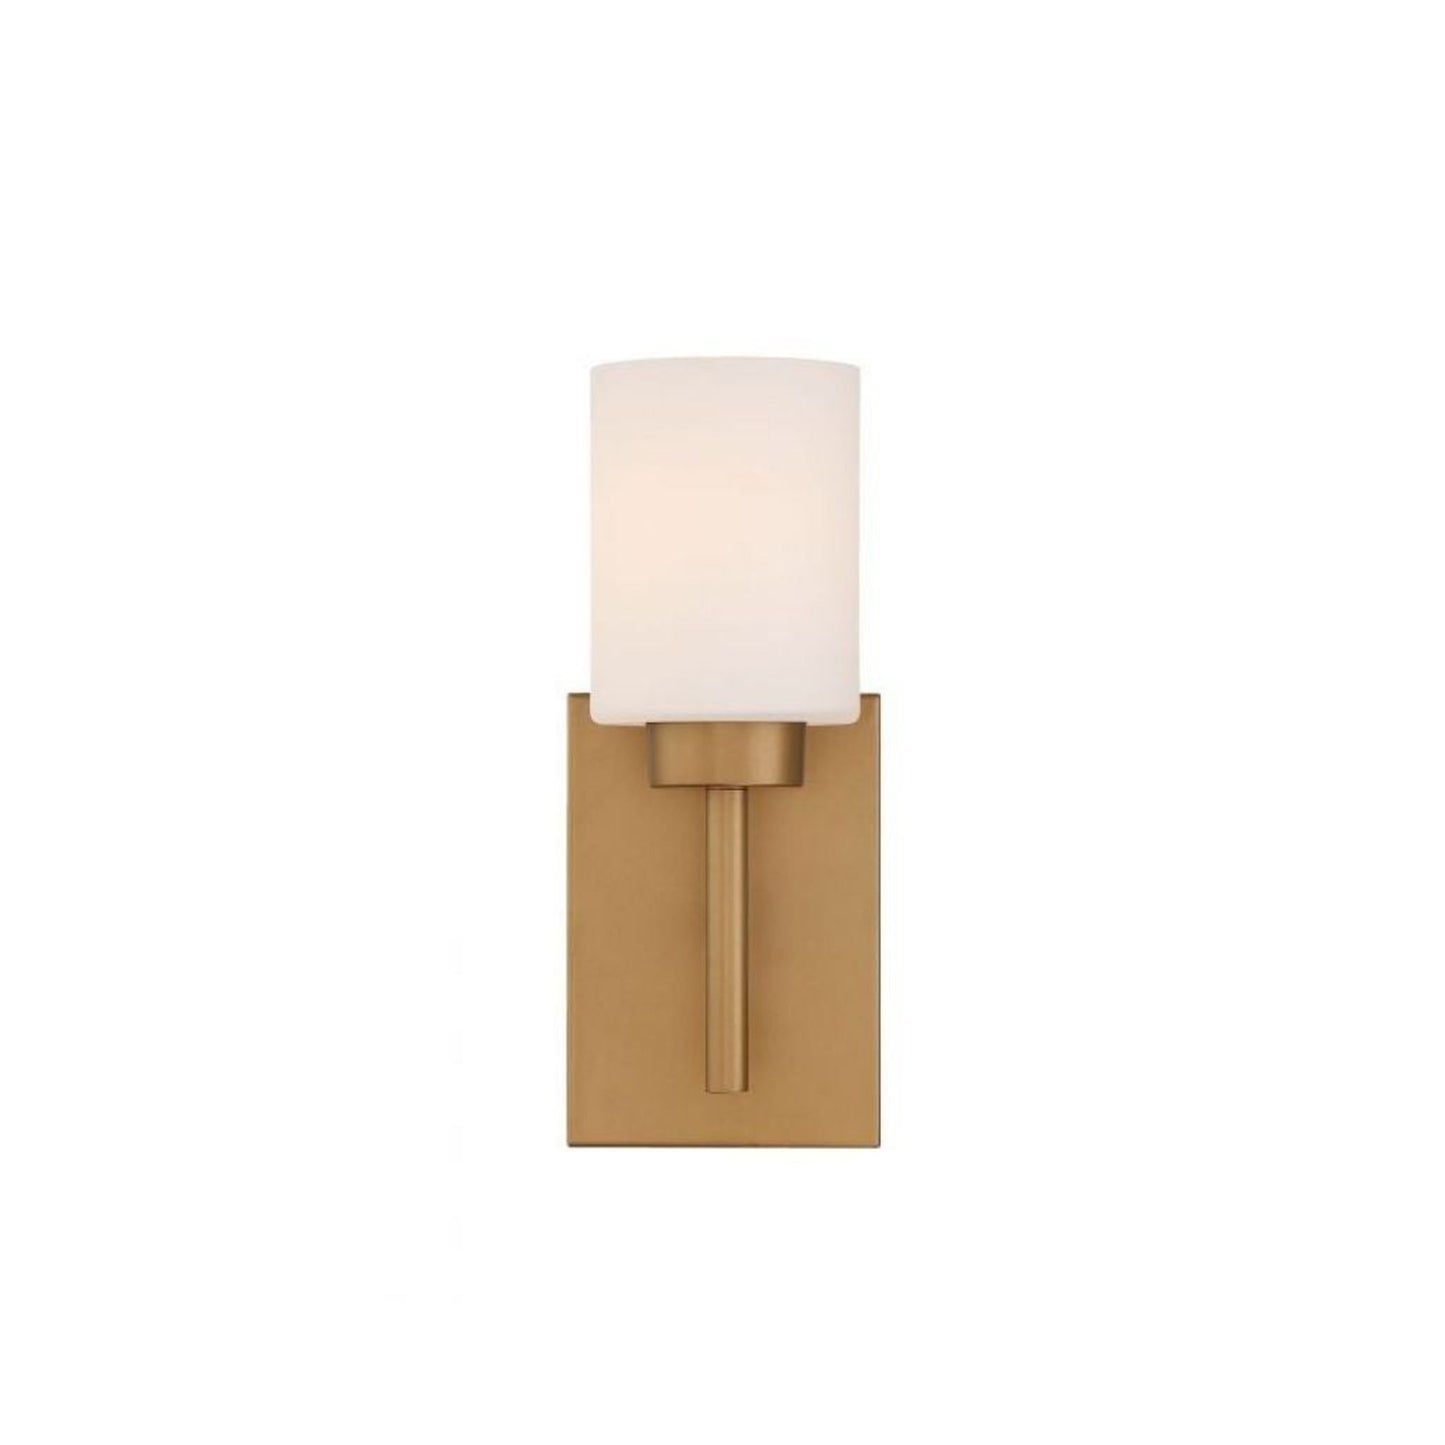 Craftmade Cadence 5" x 11" 1-Light Soft Gold Wall Sconce With White Frosted Glass Shade